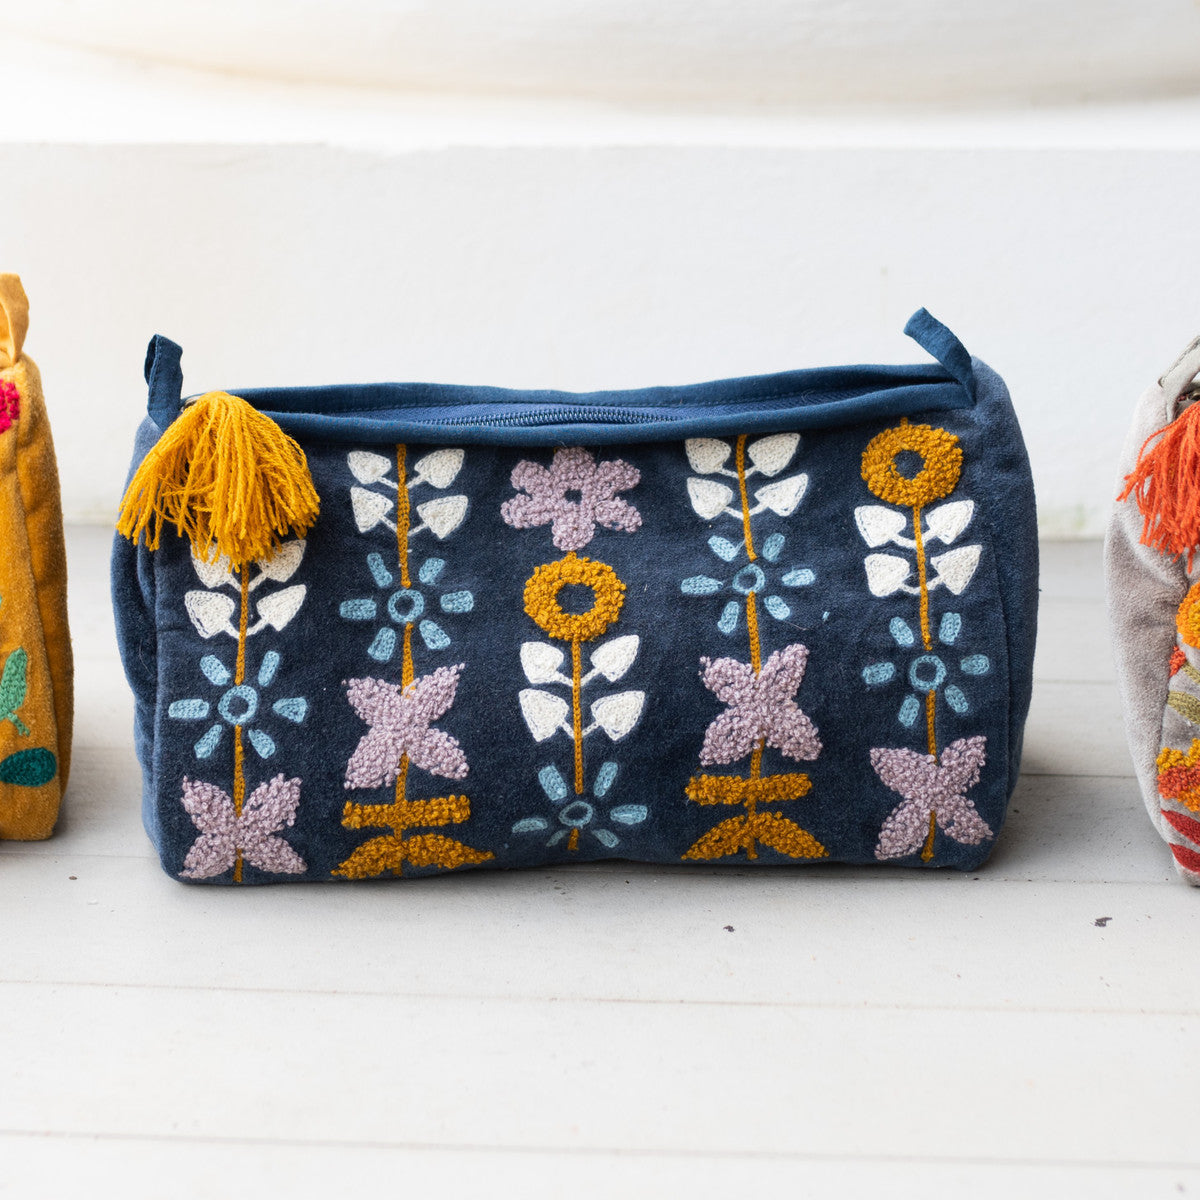 blue zipper bag with floral embroidery on a white counter.